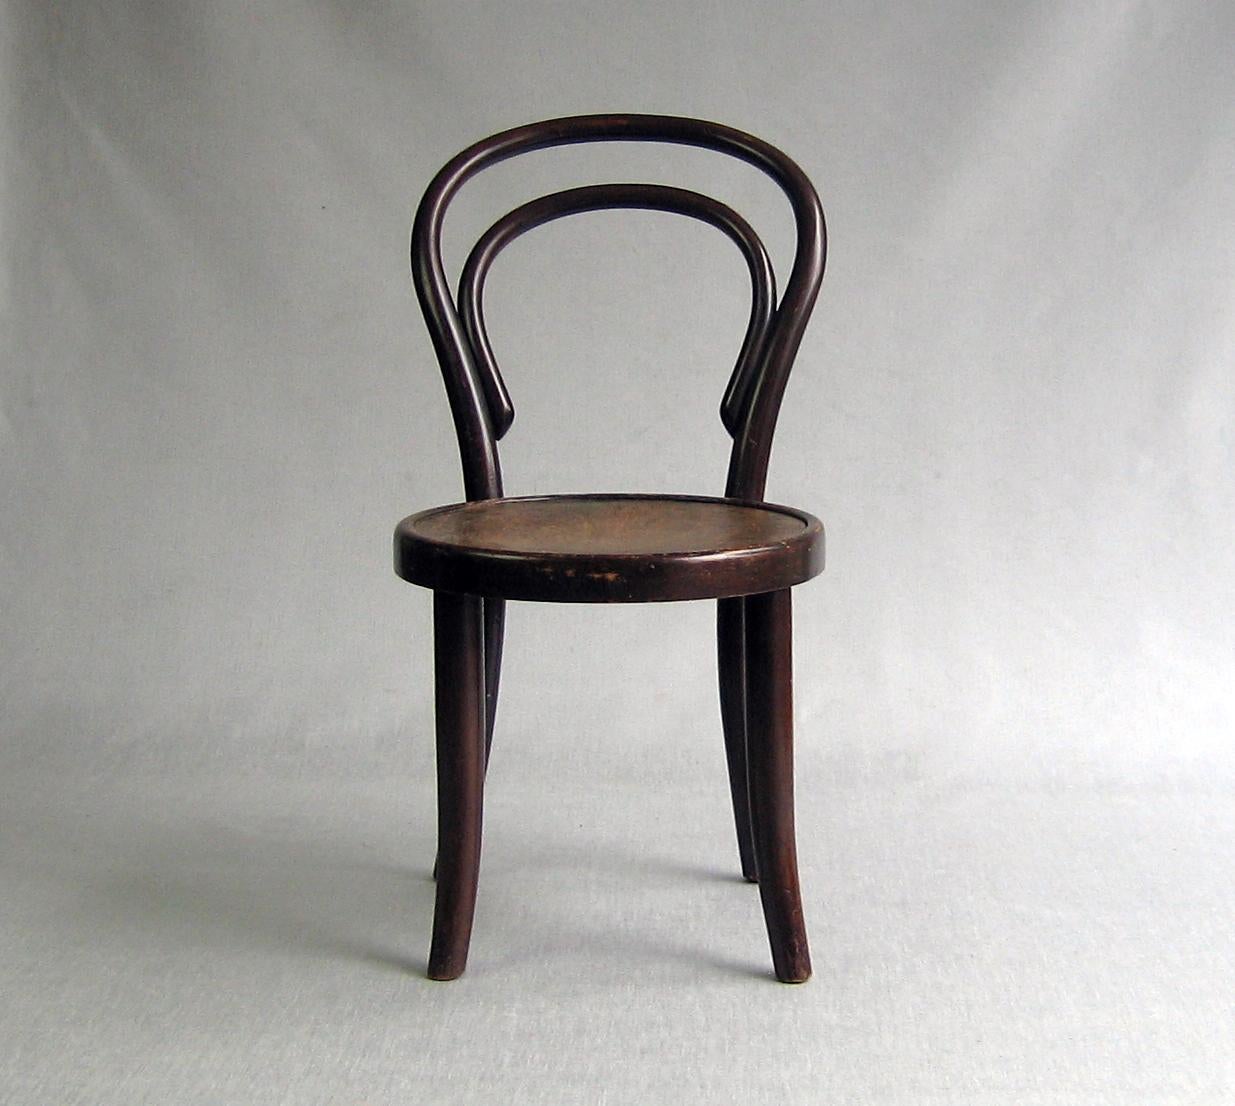 Austrian Thonet Child Chair No14 / designed 1859 Vienna / Stamped and labeled / Bentwood